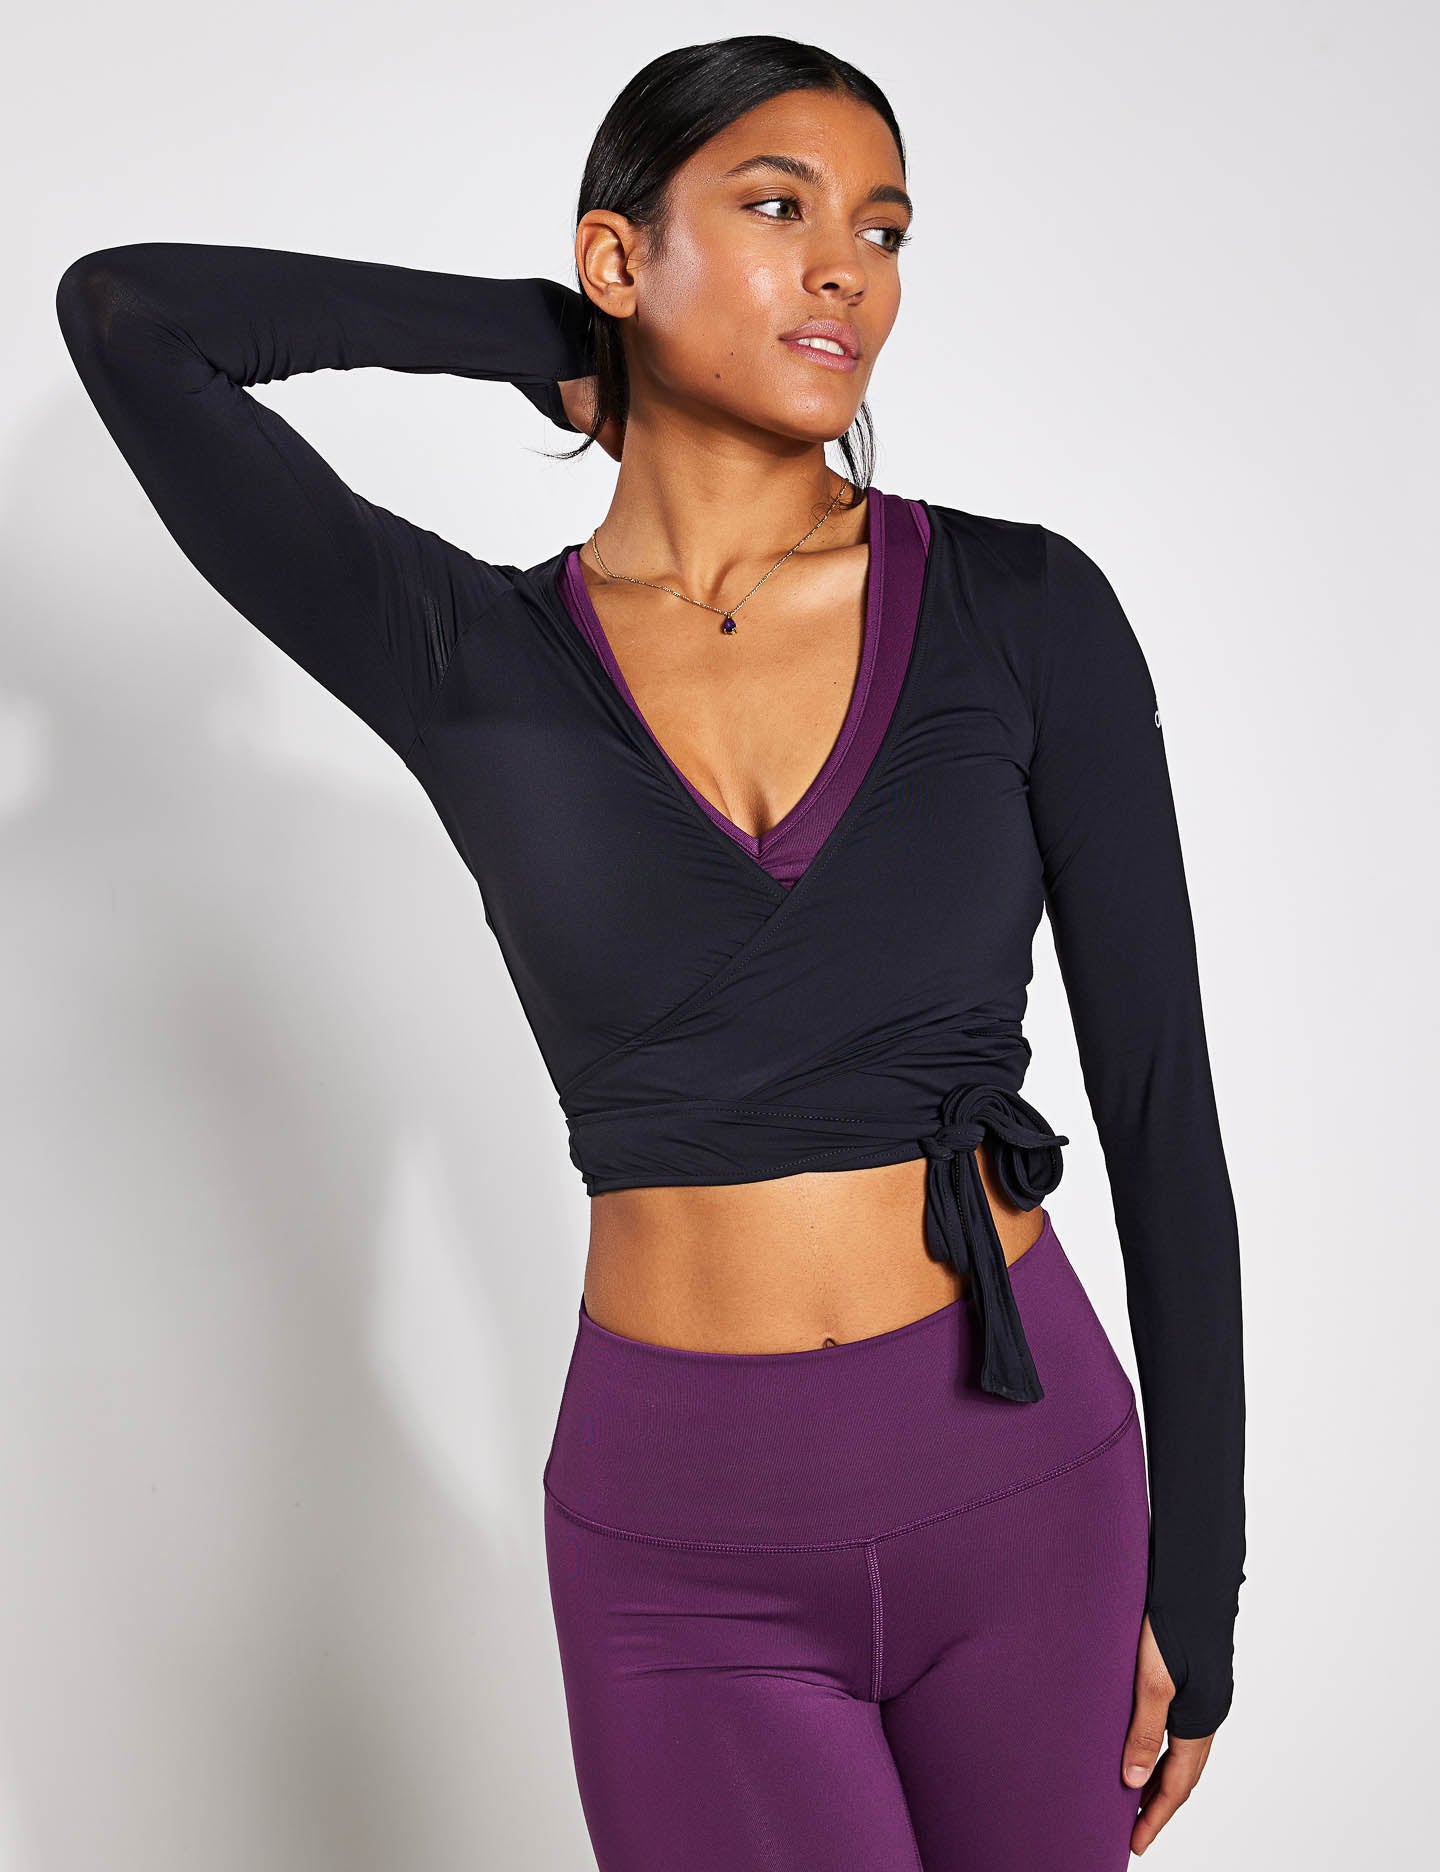 Women's Alo Yoga Tops from $48